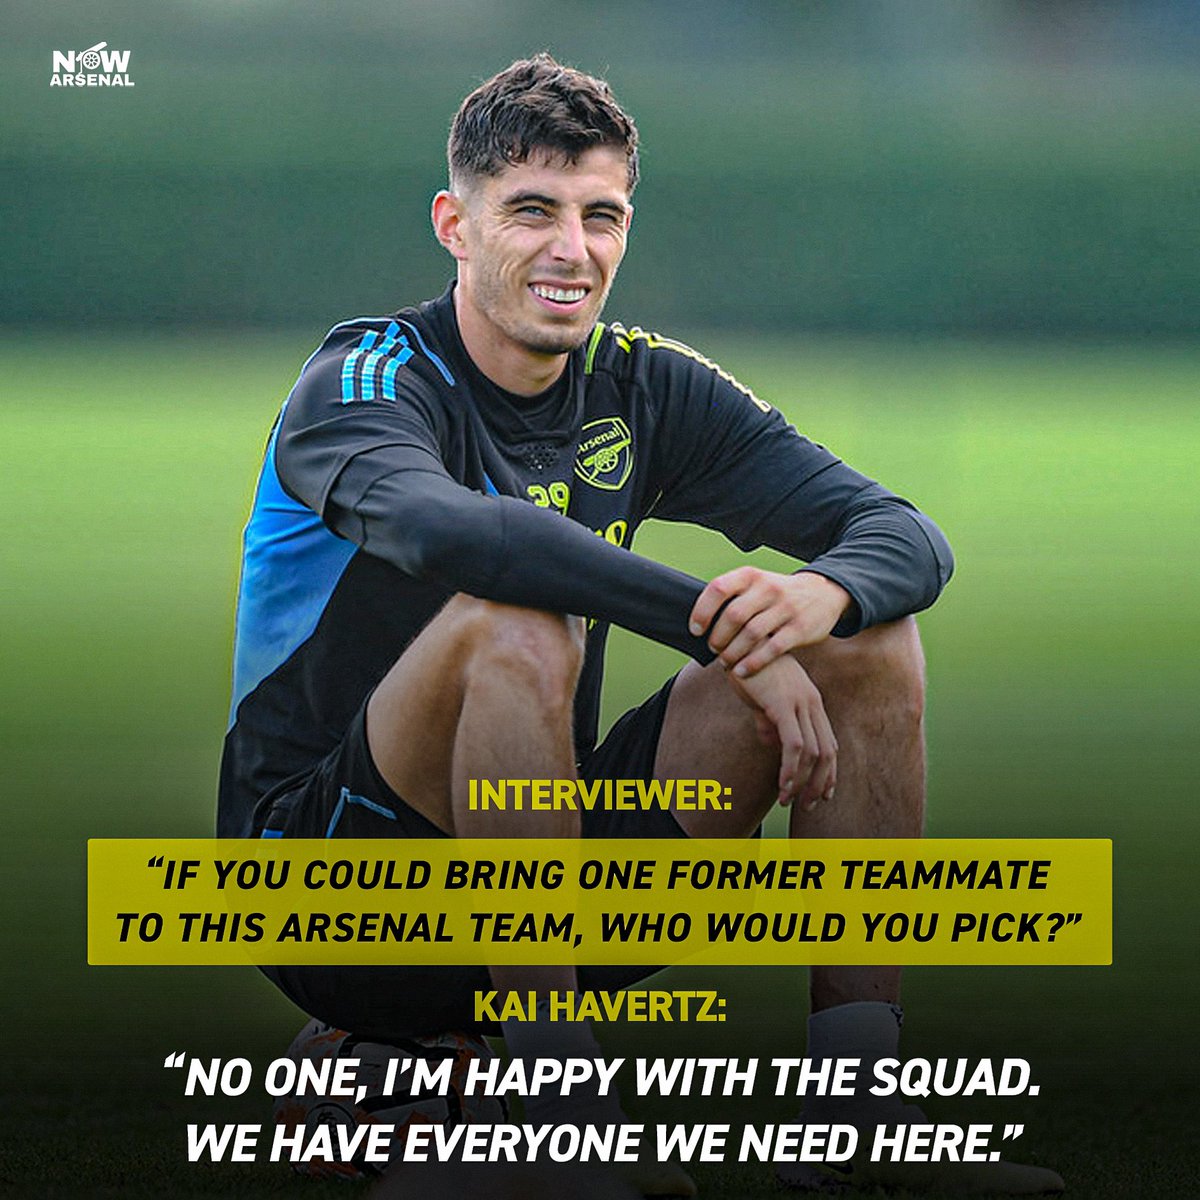 Arsenal fans will love Kai Havertz’ response when asked which former teammate he would like to add to the current Gunners squad.

No Chelsea players needed…👀🤣